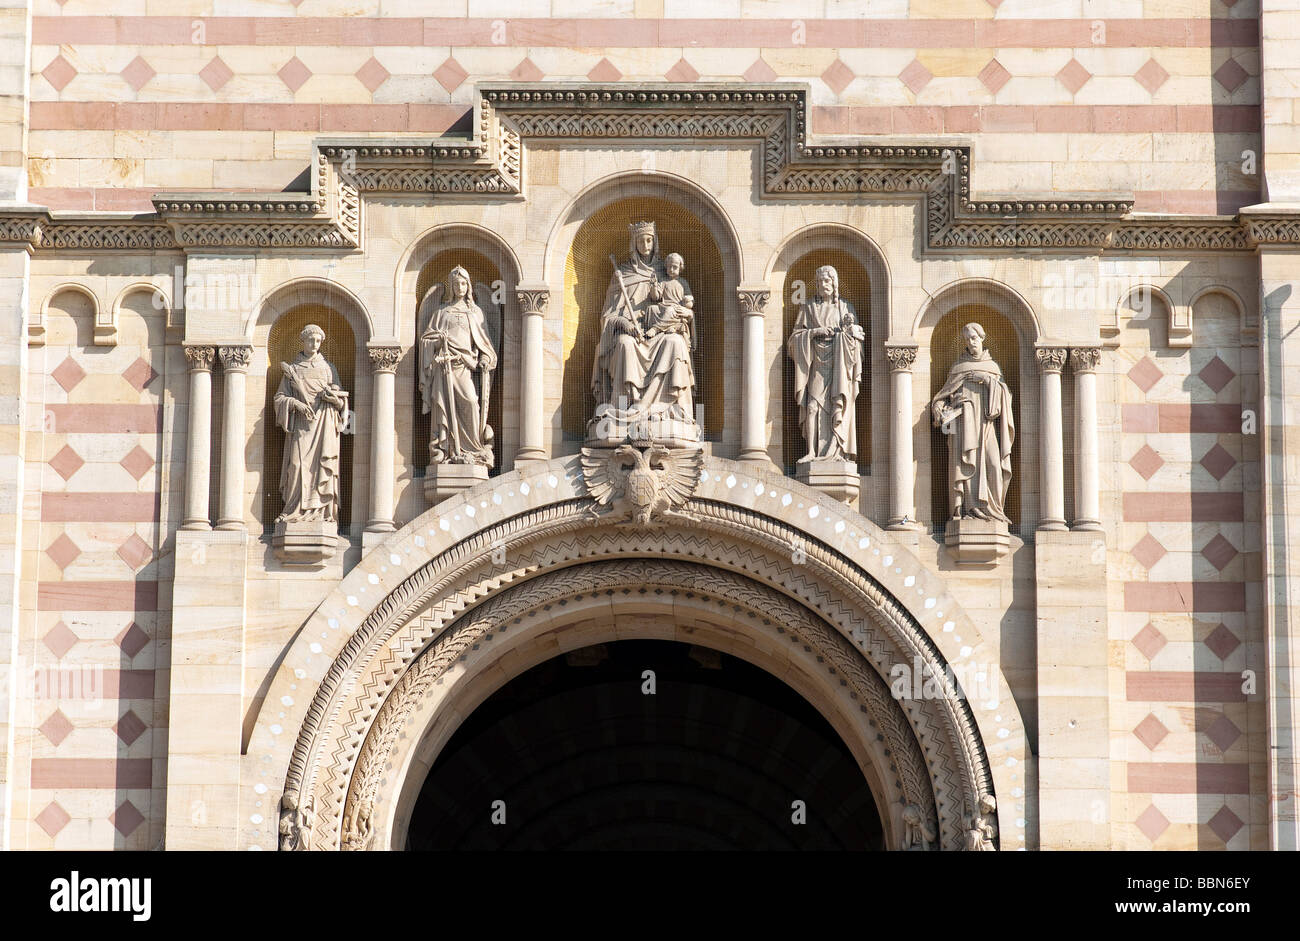 Speyer Cathedral, West Facade, patrons of the cathedral. v.l.n.r. Archangel Michael, John the Baptist, Mary, Stephanus, Bernard Stock Photo